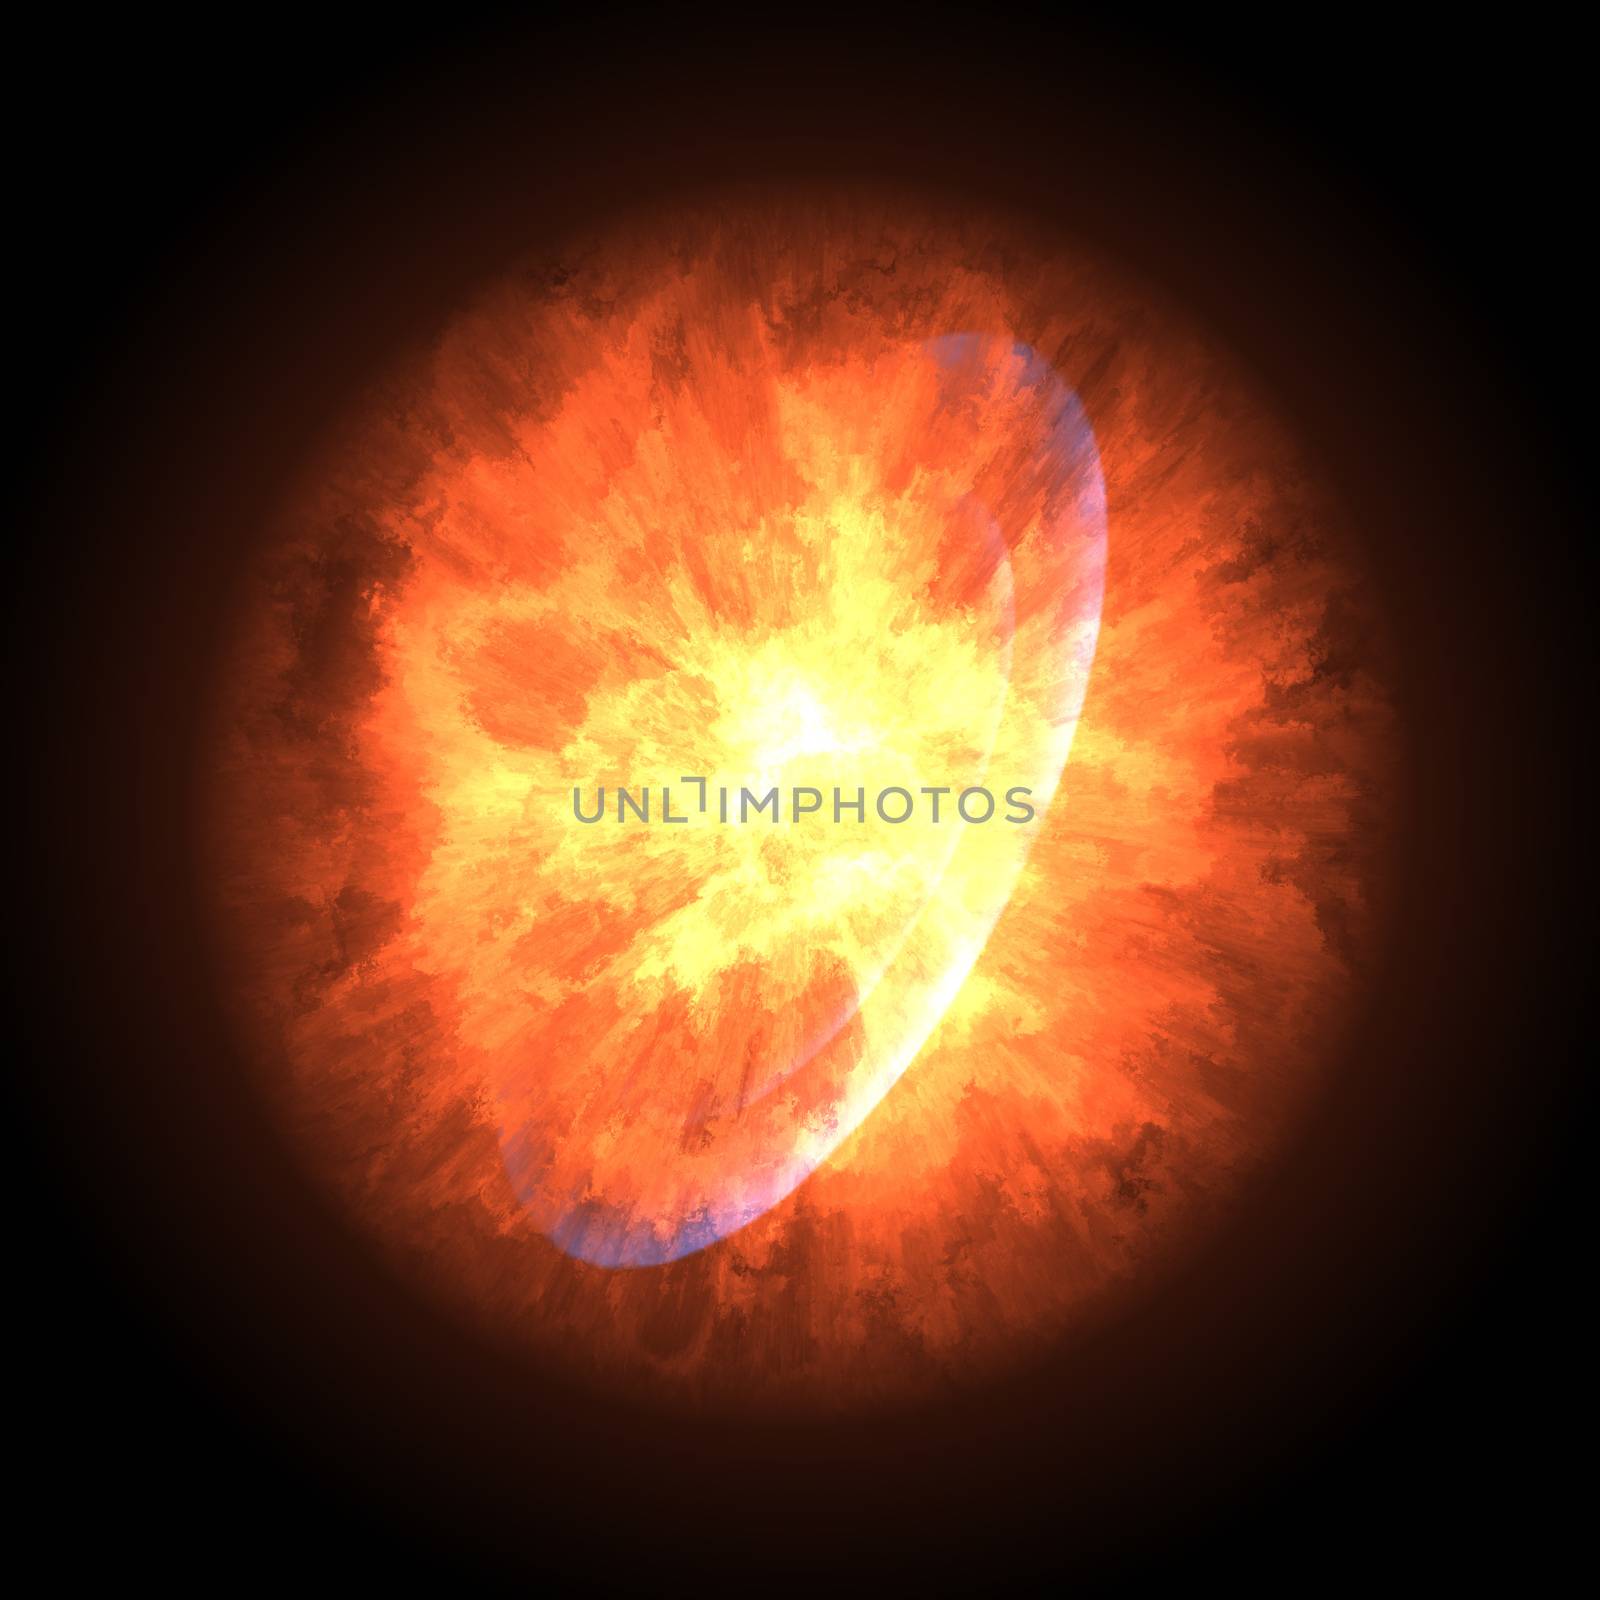 A supernova explosion in space illustration